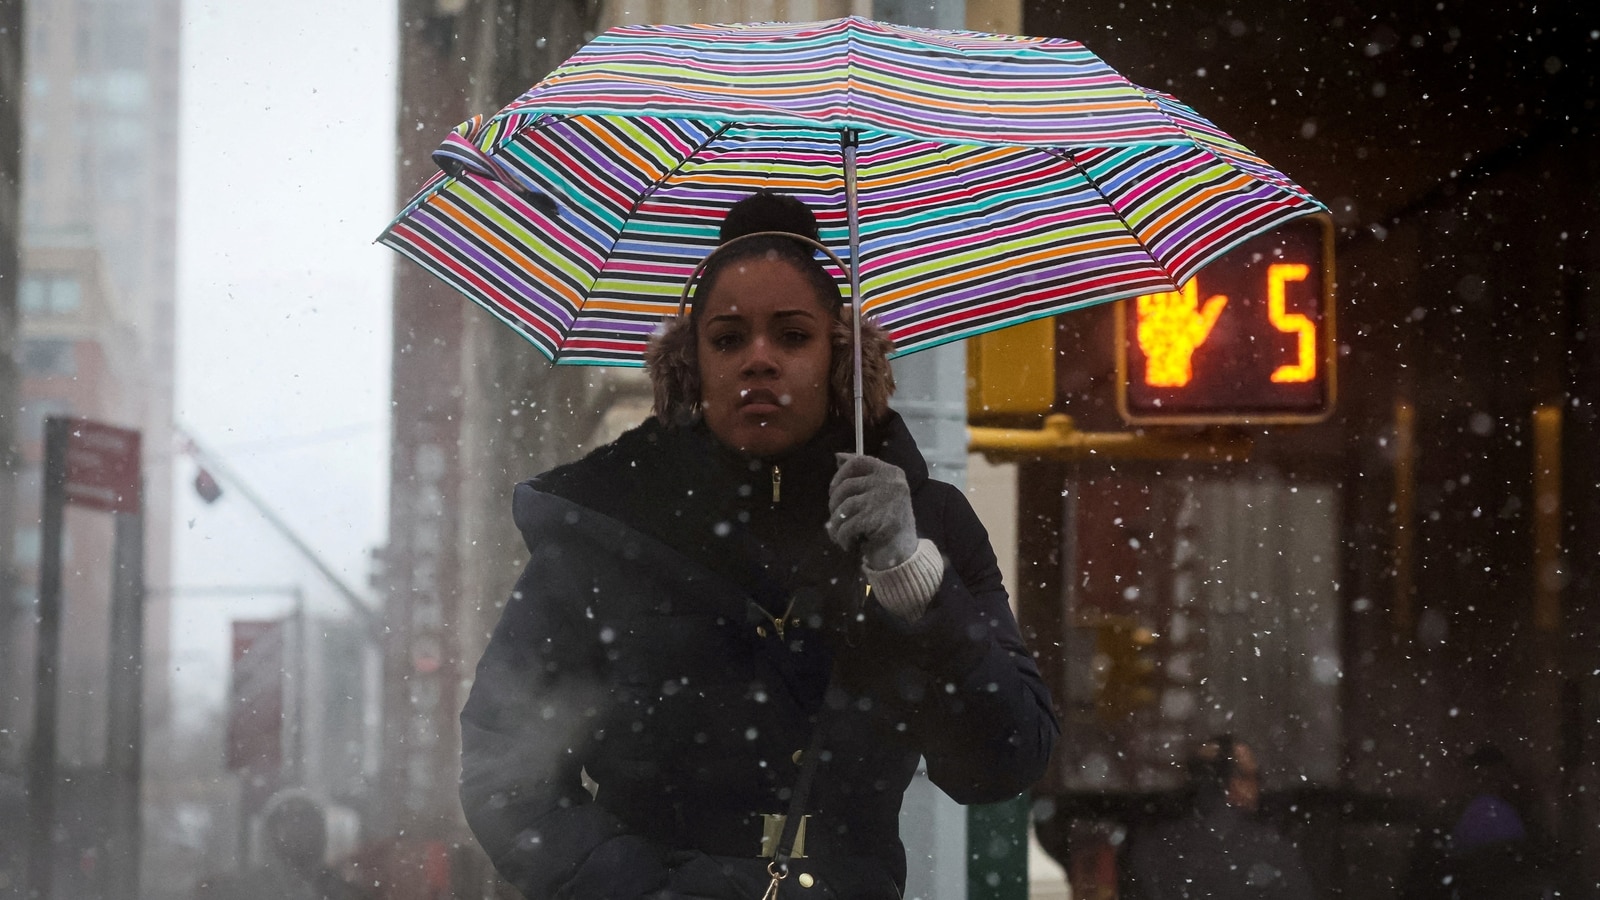 NYC winter storm warning: Schools closed due to Nor'easter snow emergency